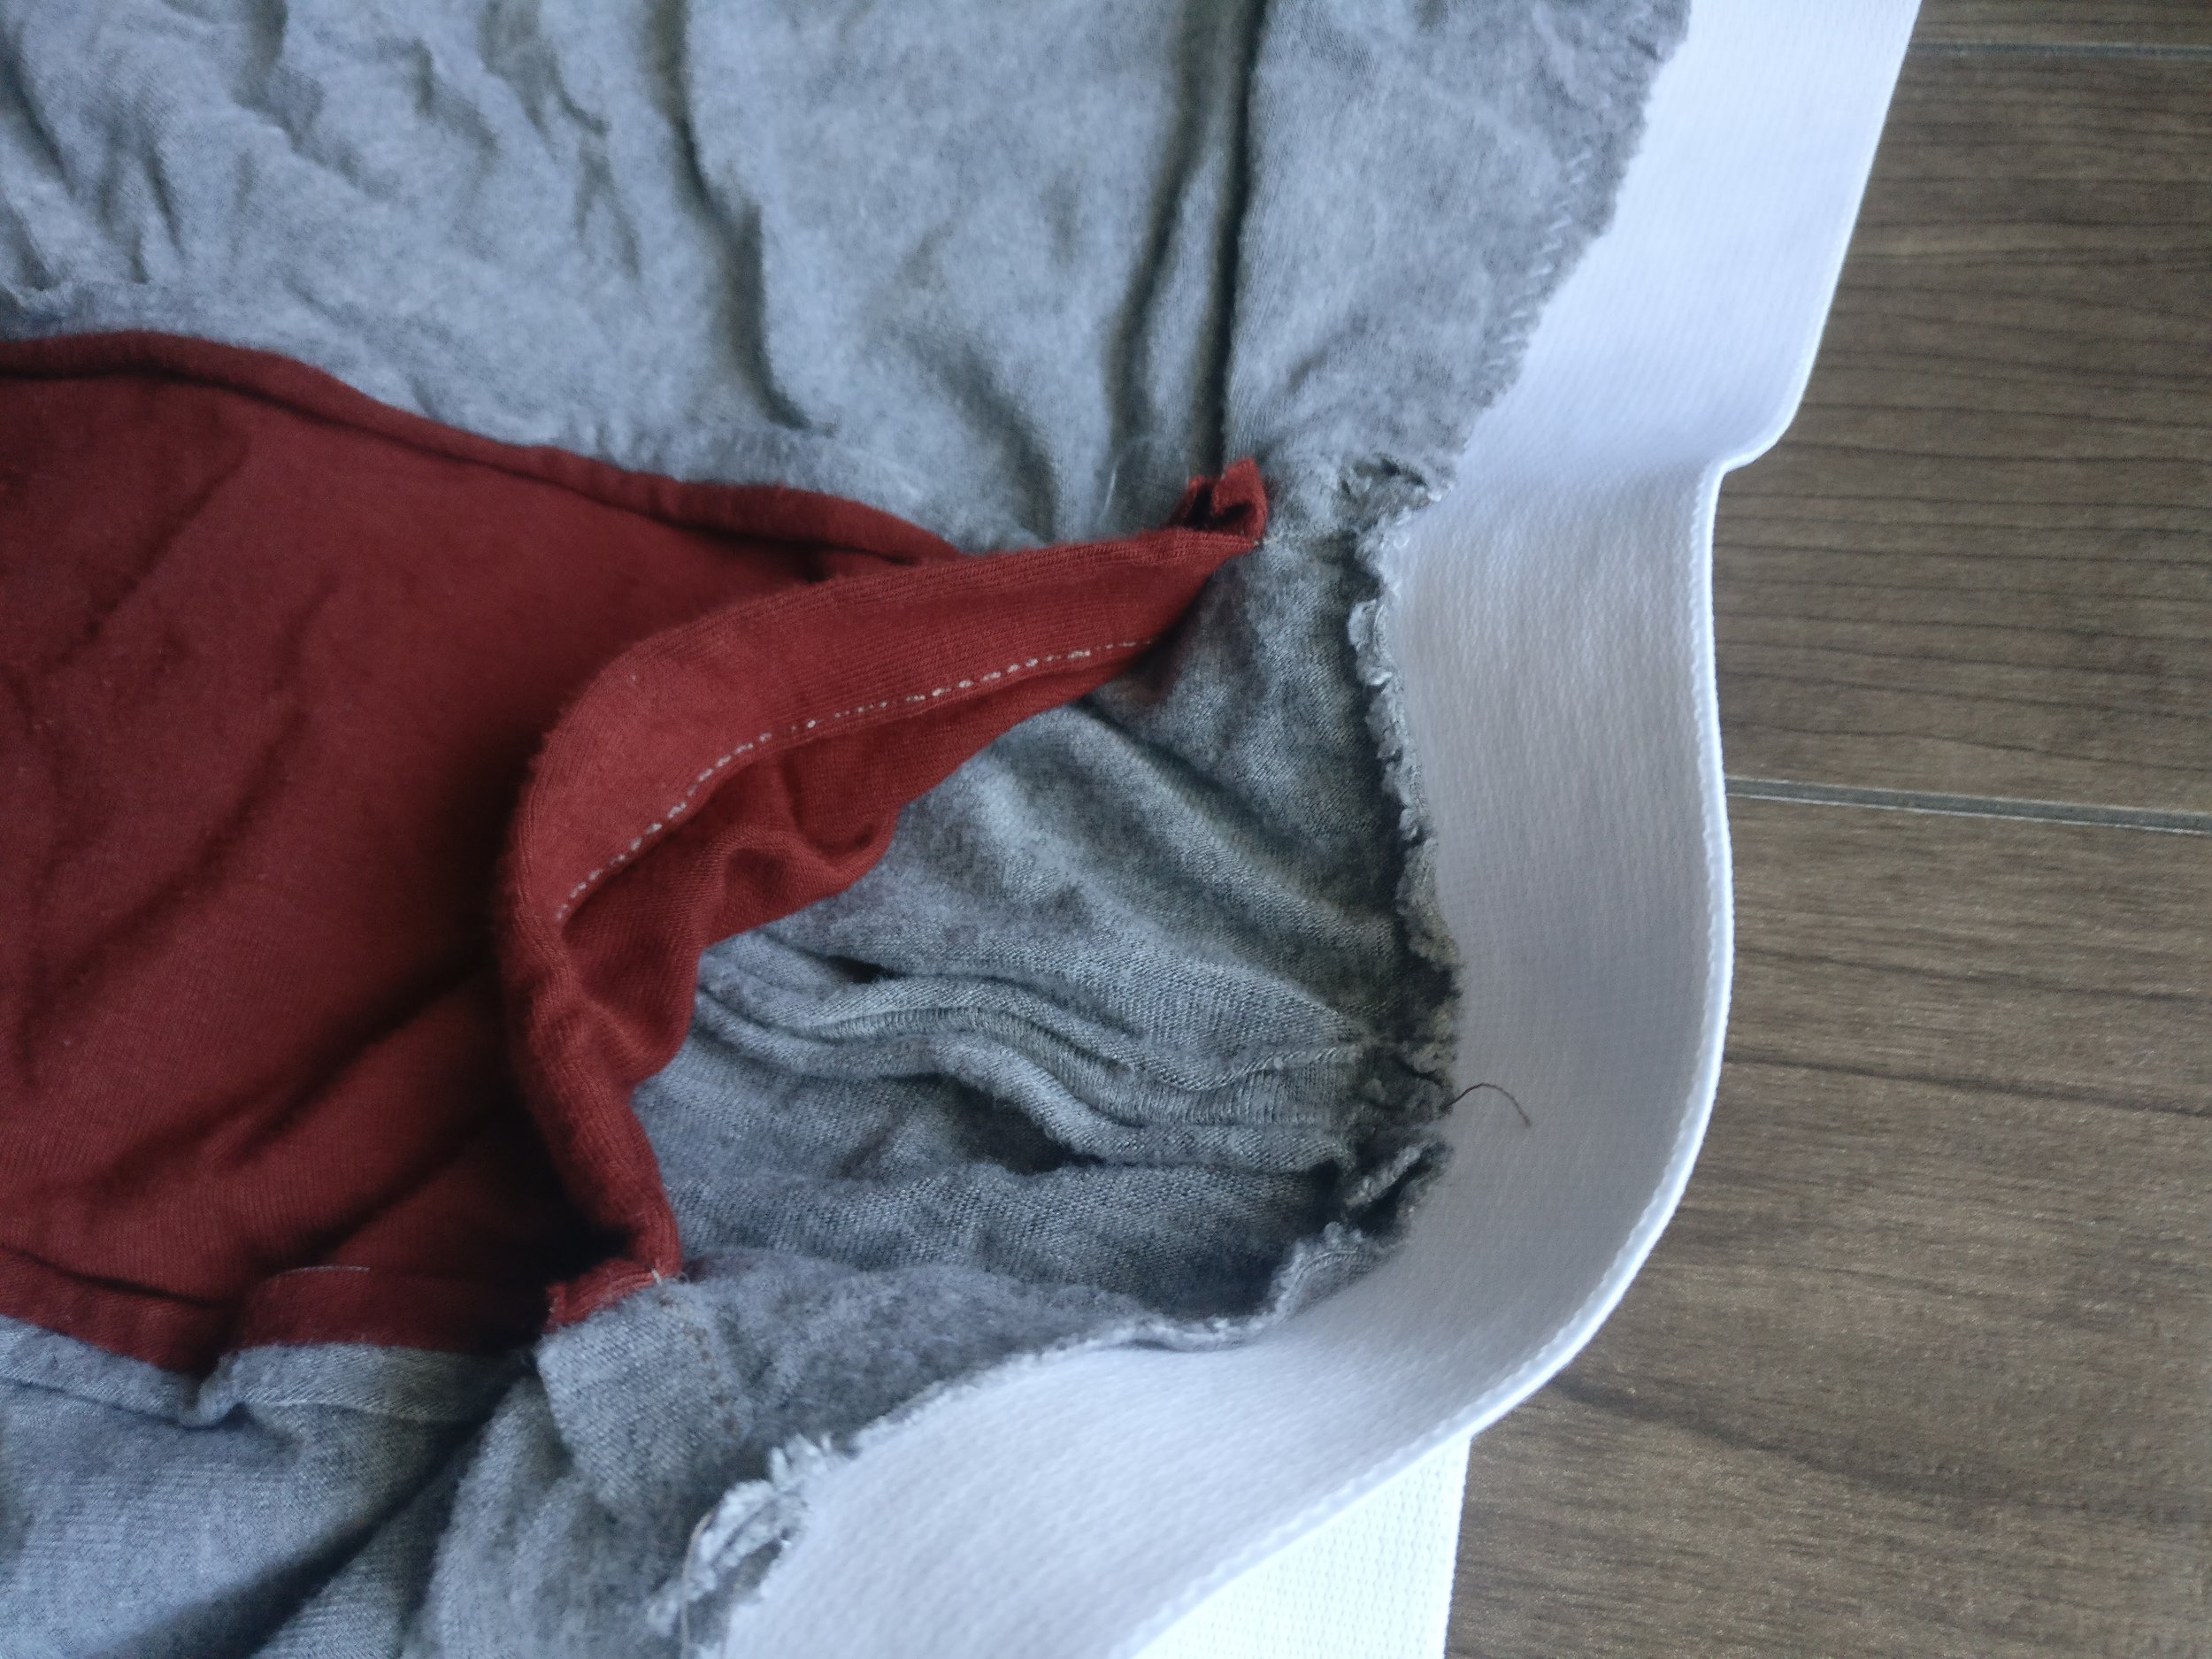 Liam: Adding a Packing Pocket to Boxer Briefs — sewqueer